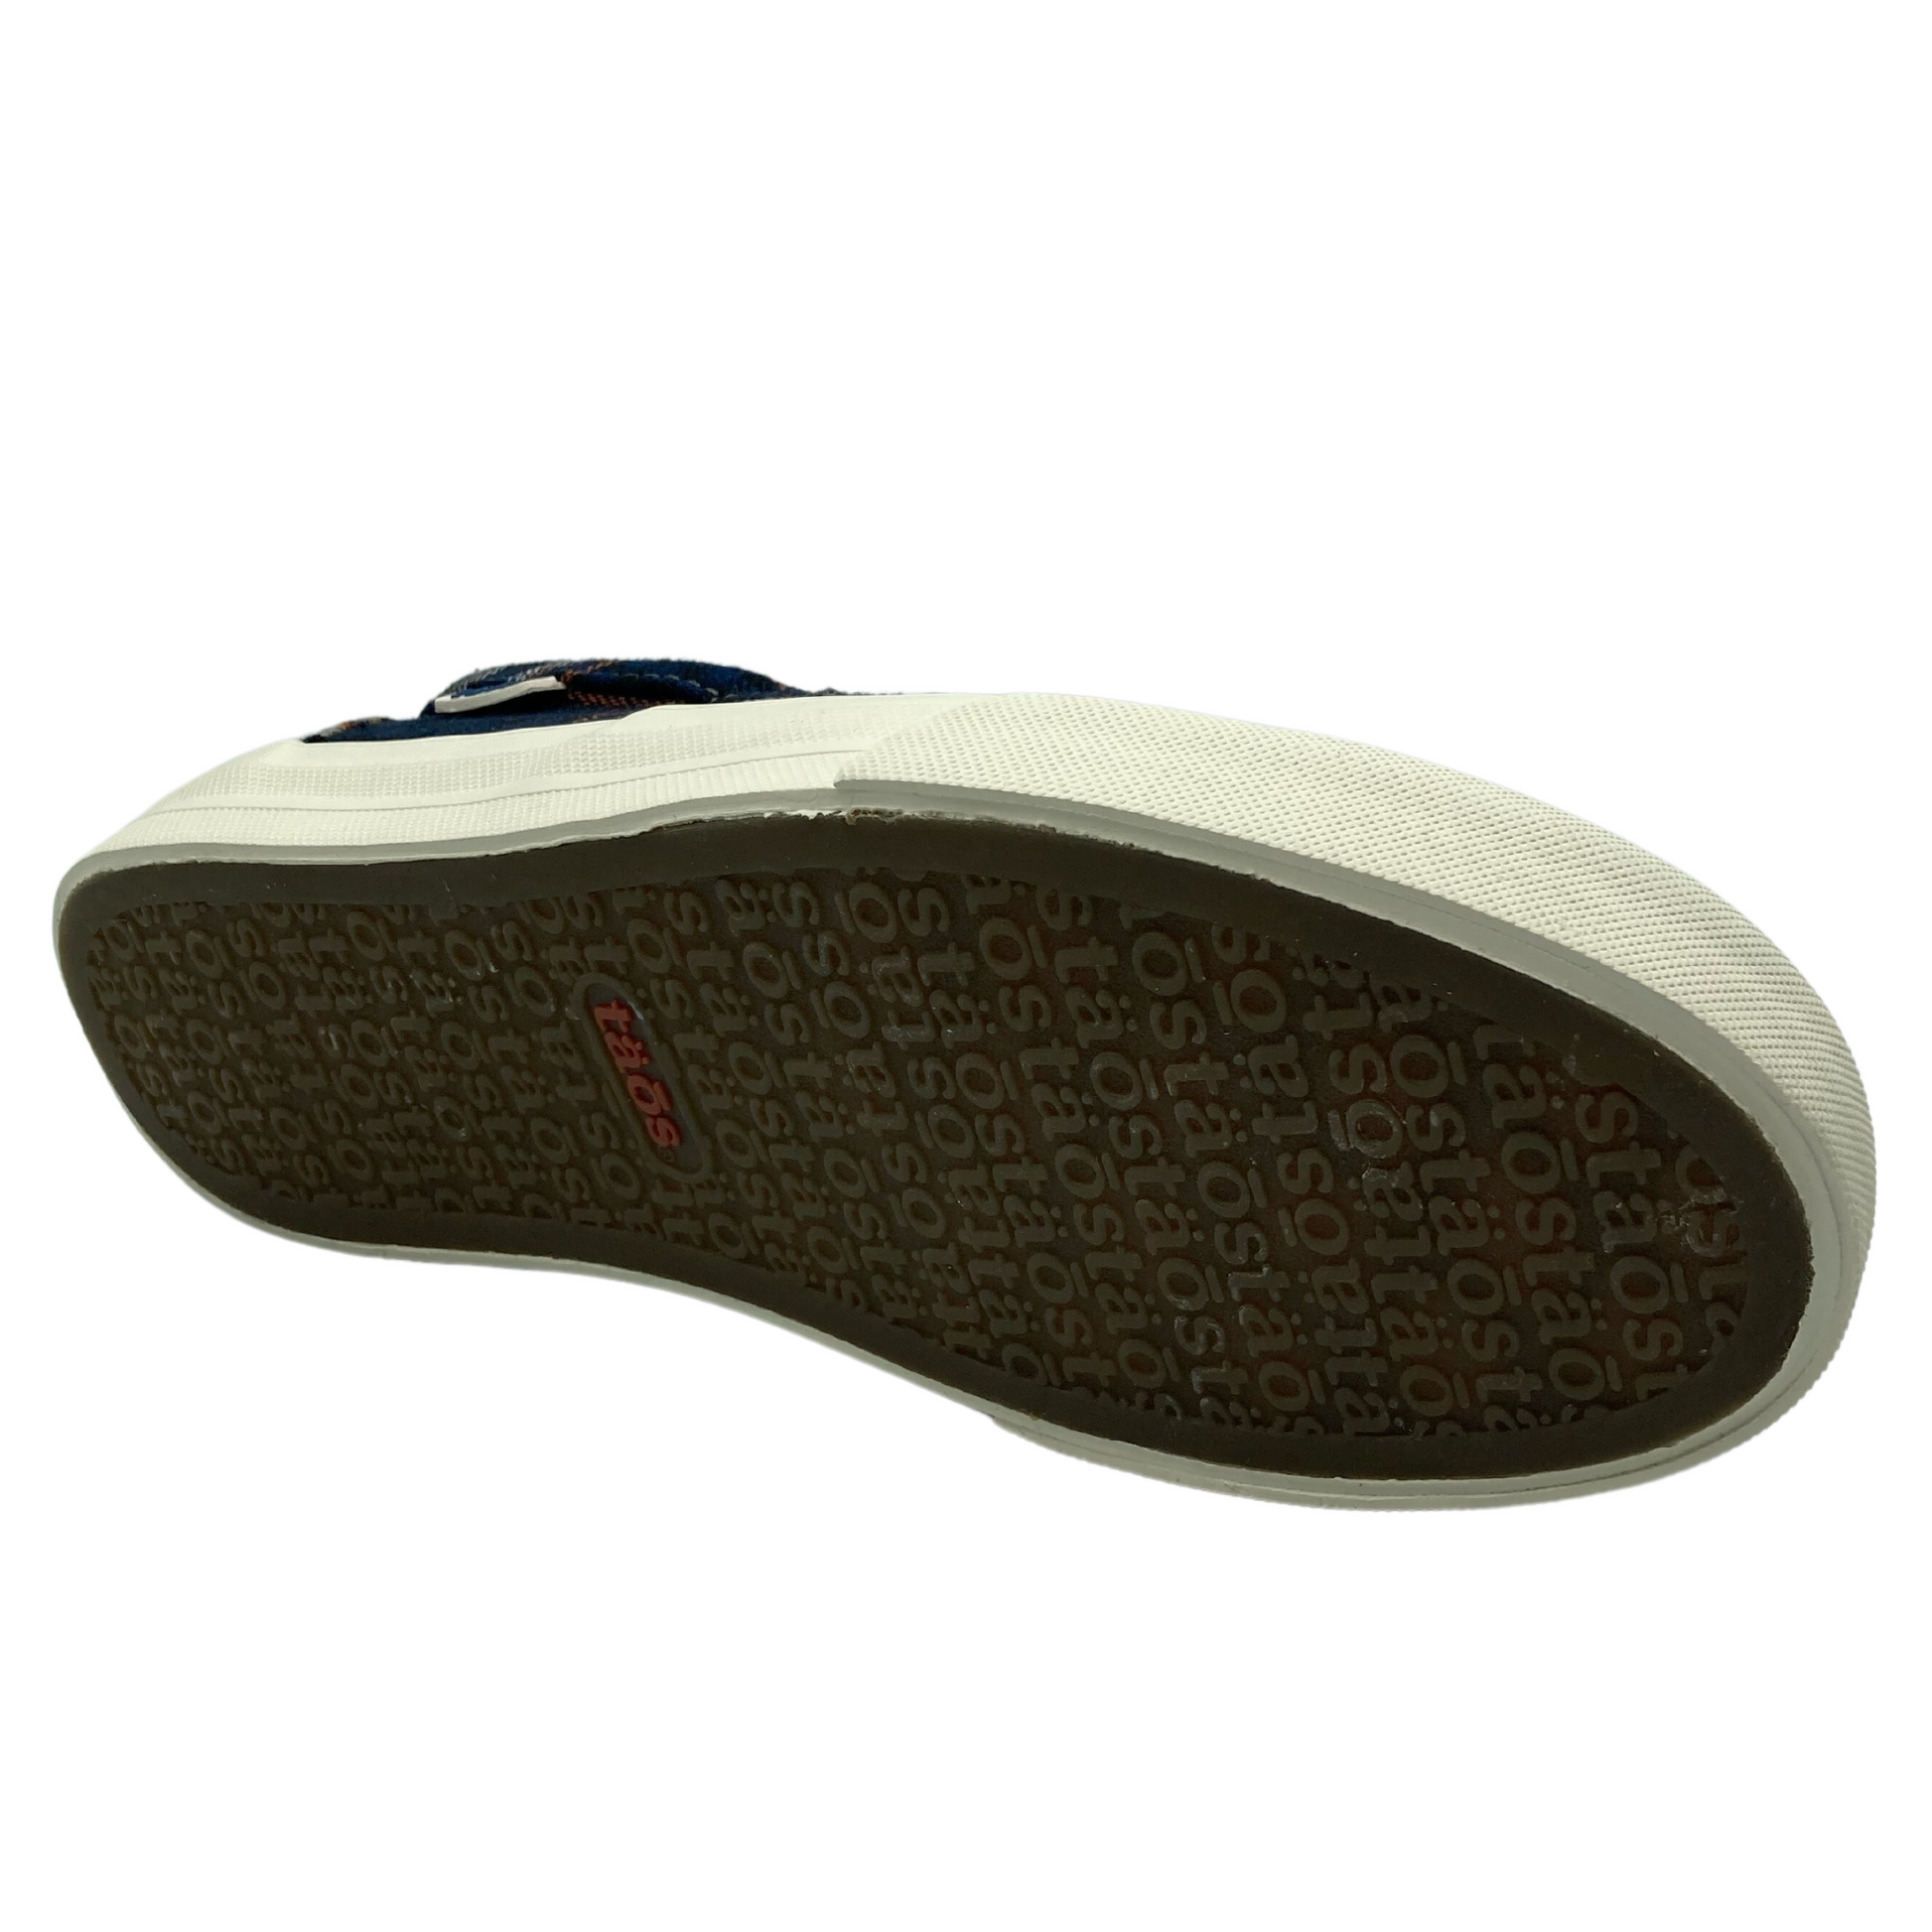 Bottom view of slip on shoe with brown rubber sole with white border